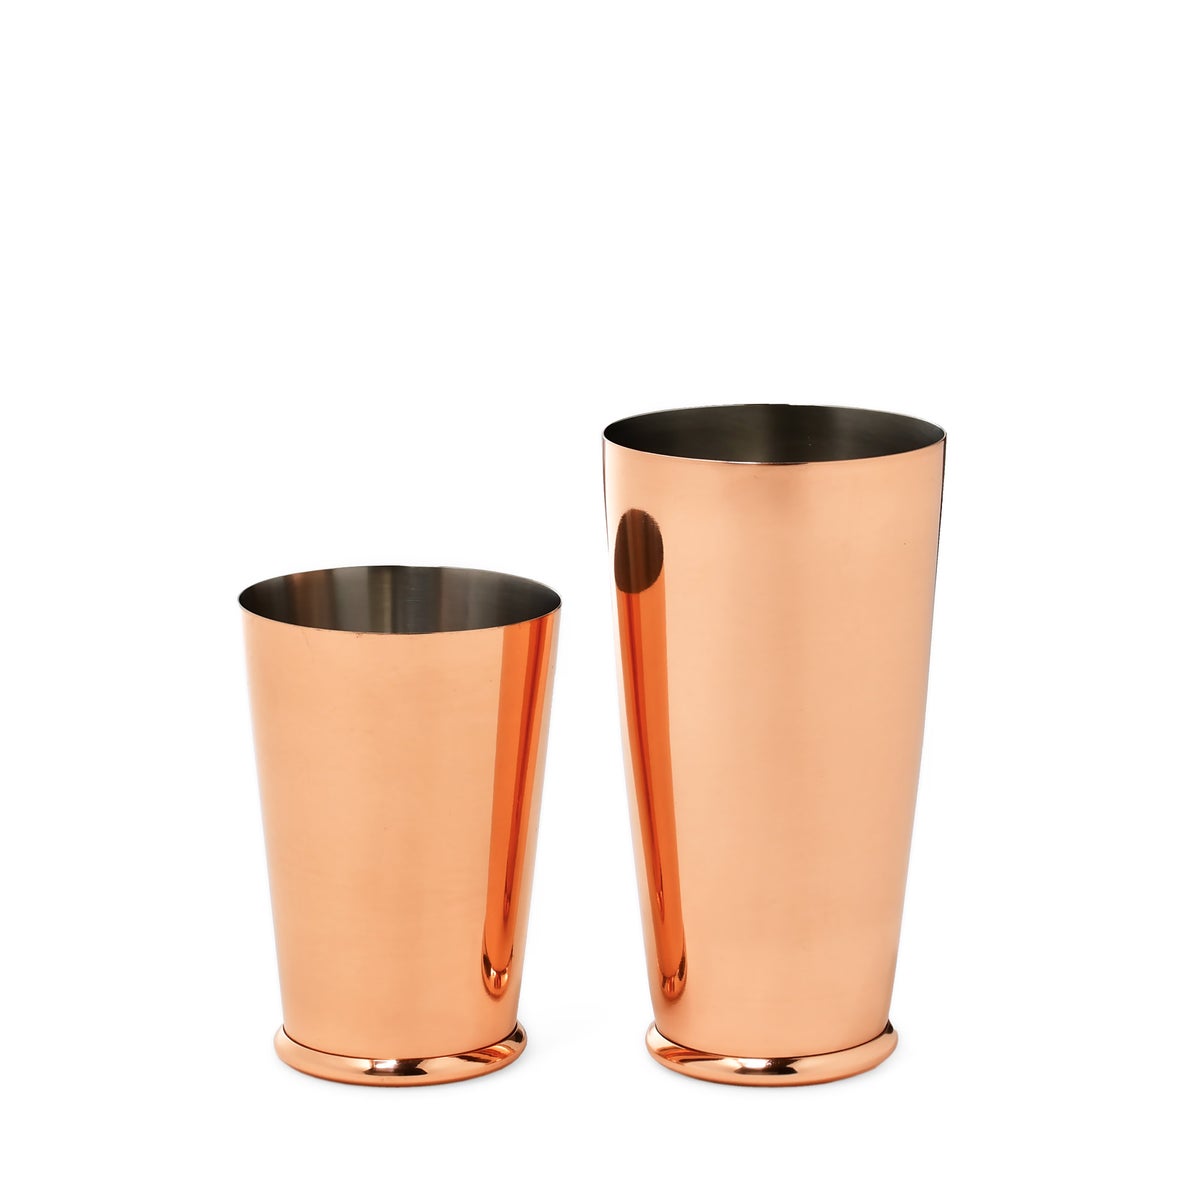 SET OF LEOPOLD® WEIGHTED SHAKING TINS / COPPER-PLATED – Cocktail